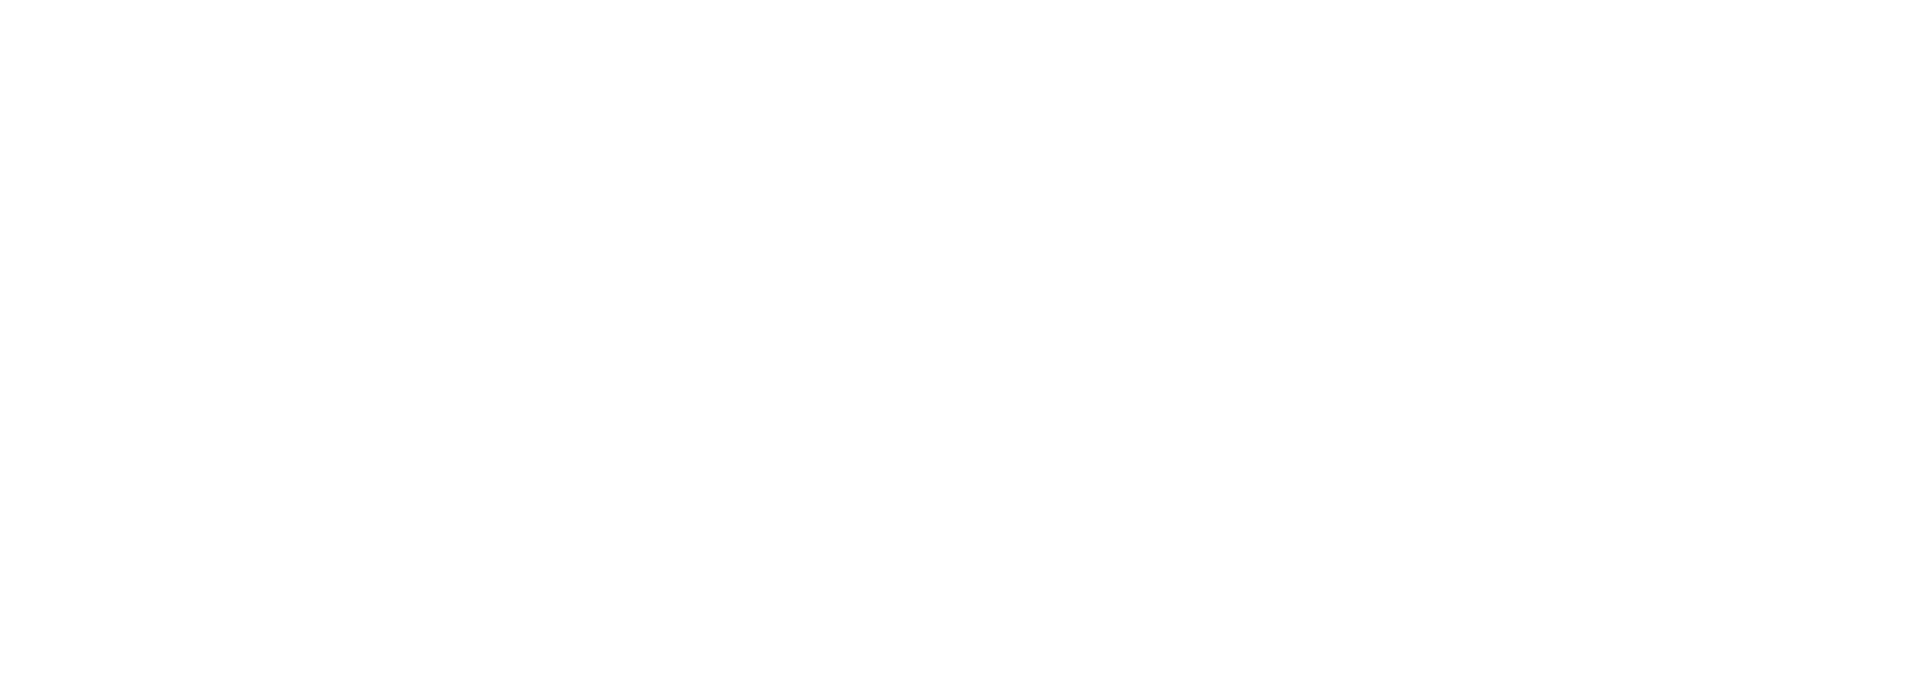 eCommerce Fulfilment Solutions At CX Services Graphic Element